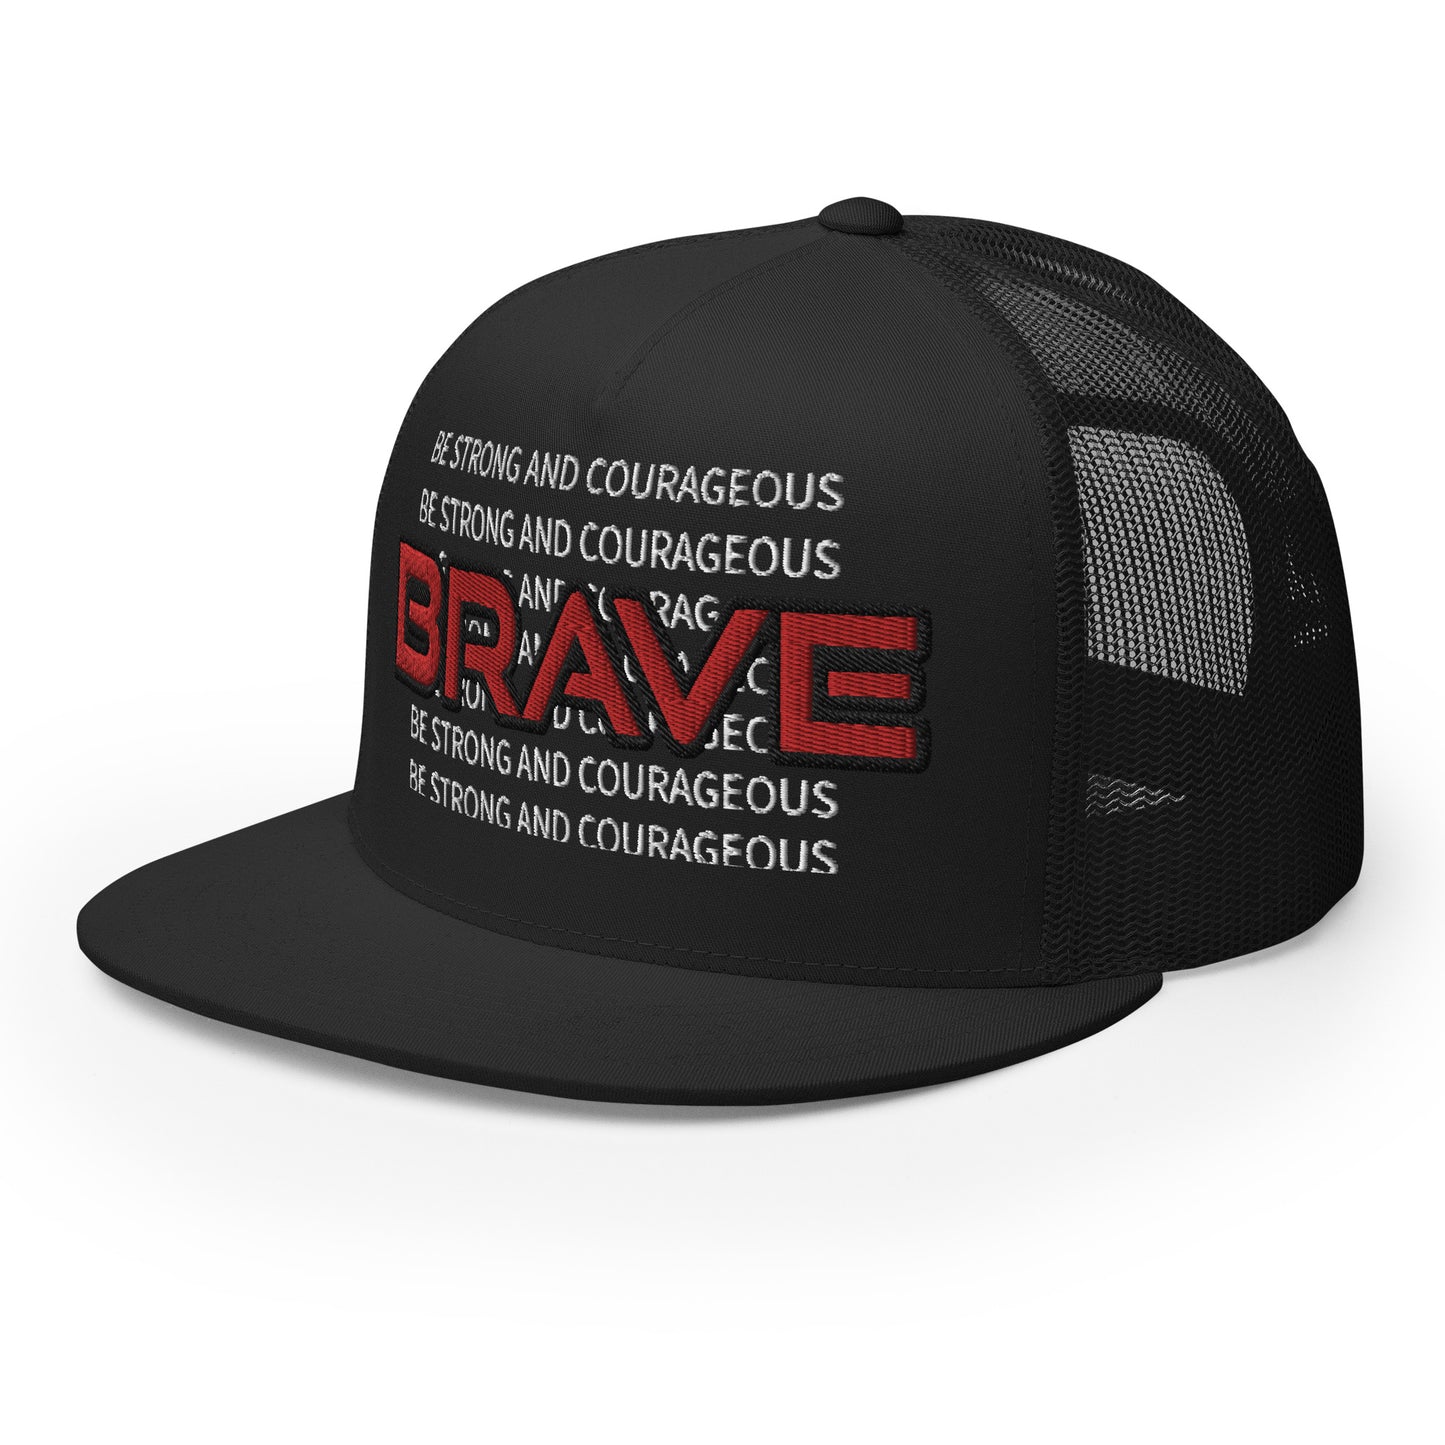 BE STRONG AND COURAGEOUS- Trucker Cap